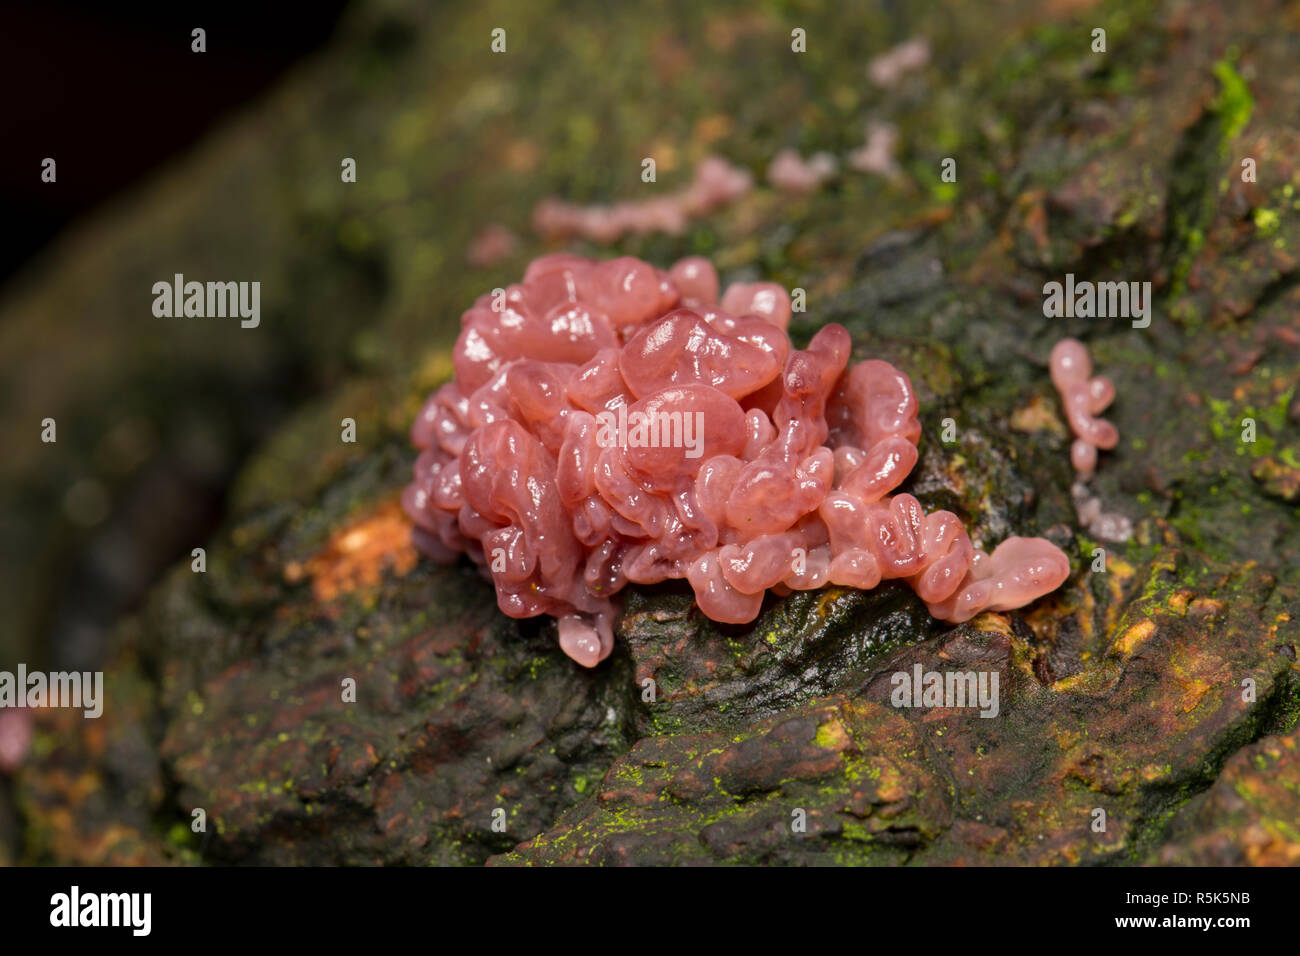 Purple jellydisc fungus, Ascocoryne sarcoides, growing on a fallen tree in woodlands in North Dorset England UK GB Stock Photo